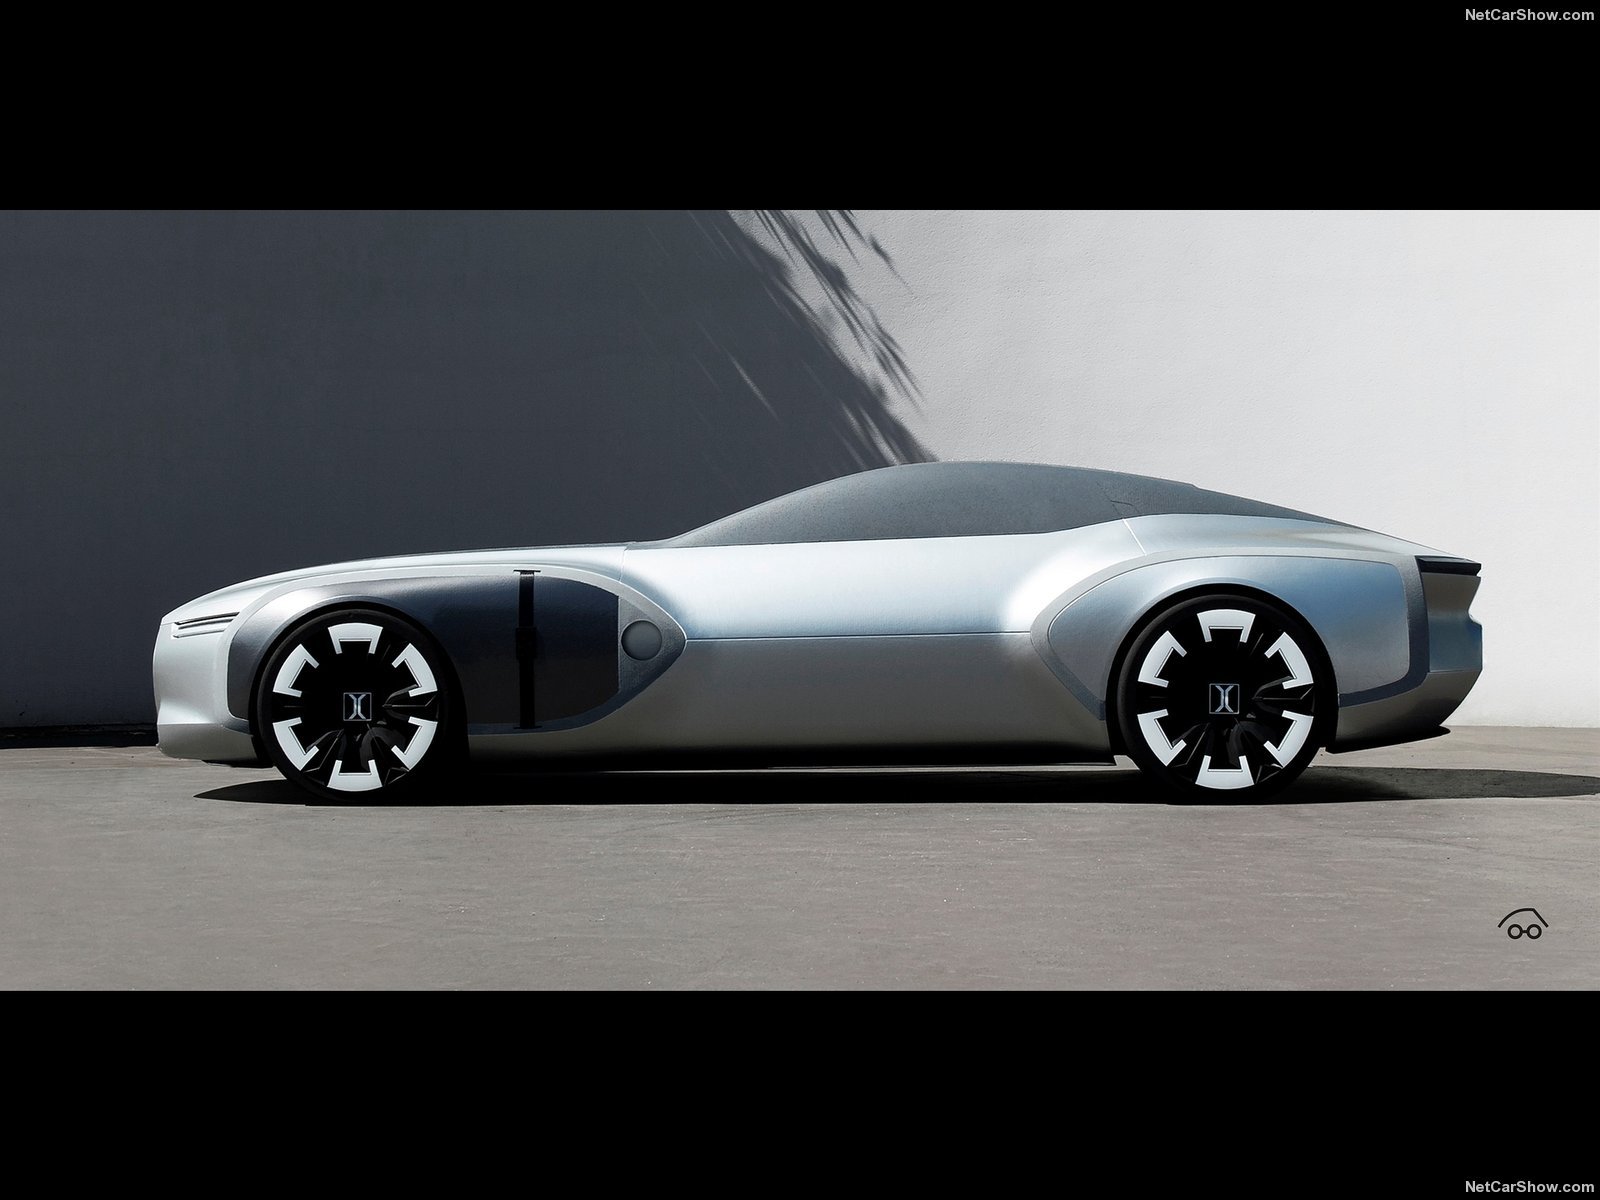 2015, Breaks, Cars, Concept, Corbusier, Coupe, Cover, Renault Wallpaper